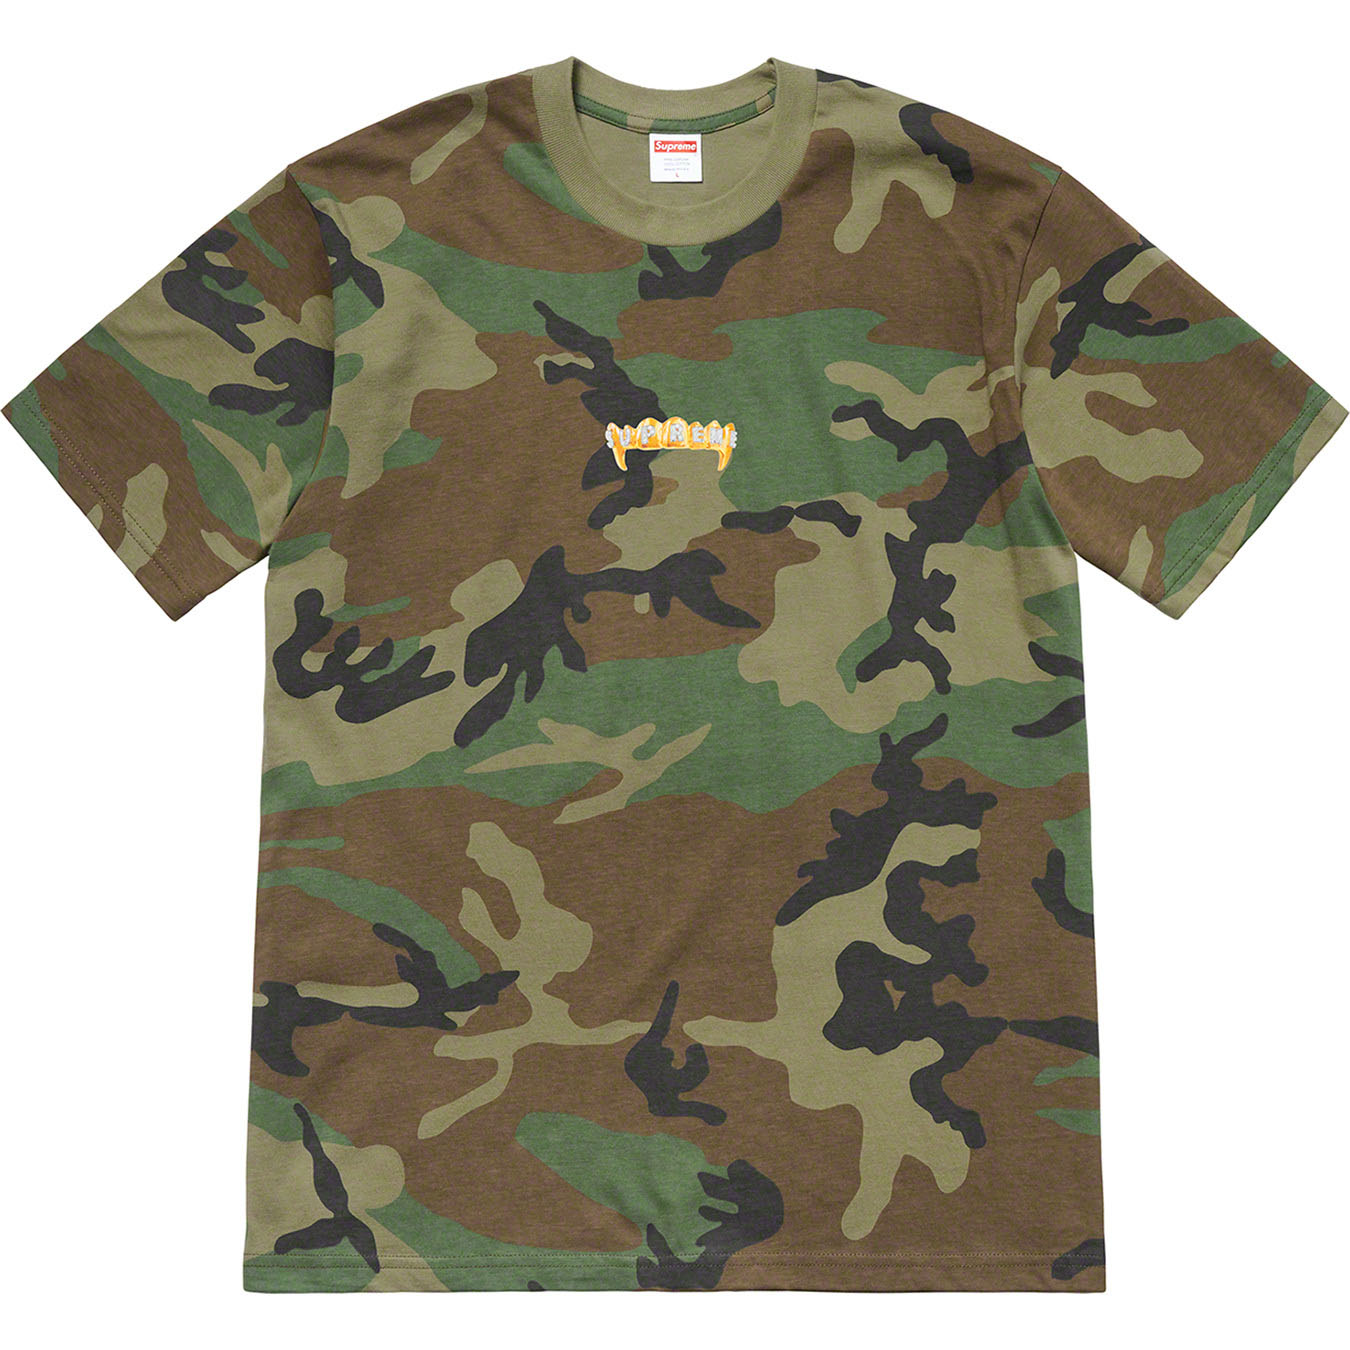 Supreme Fronts Tee